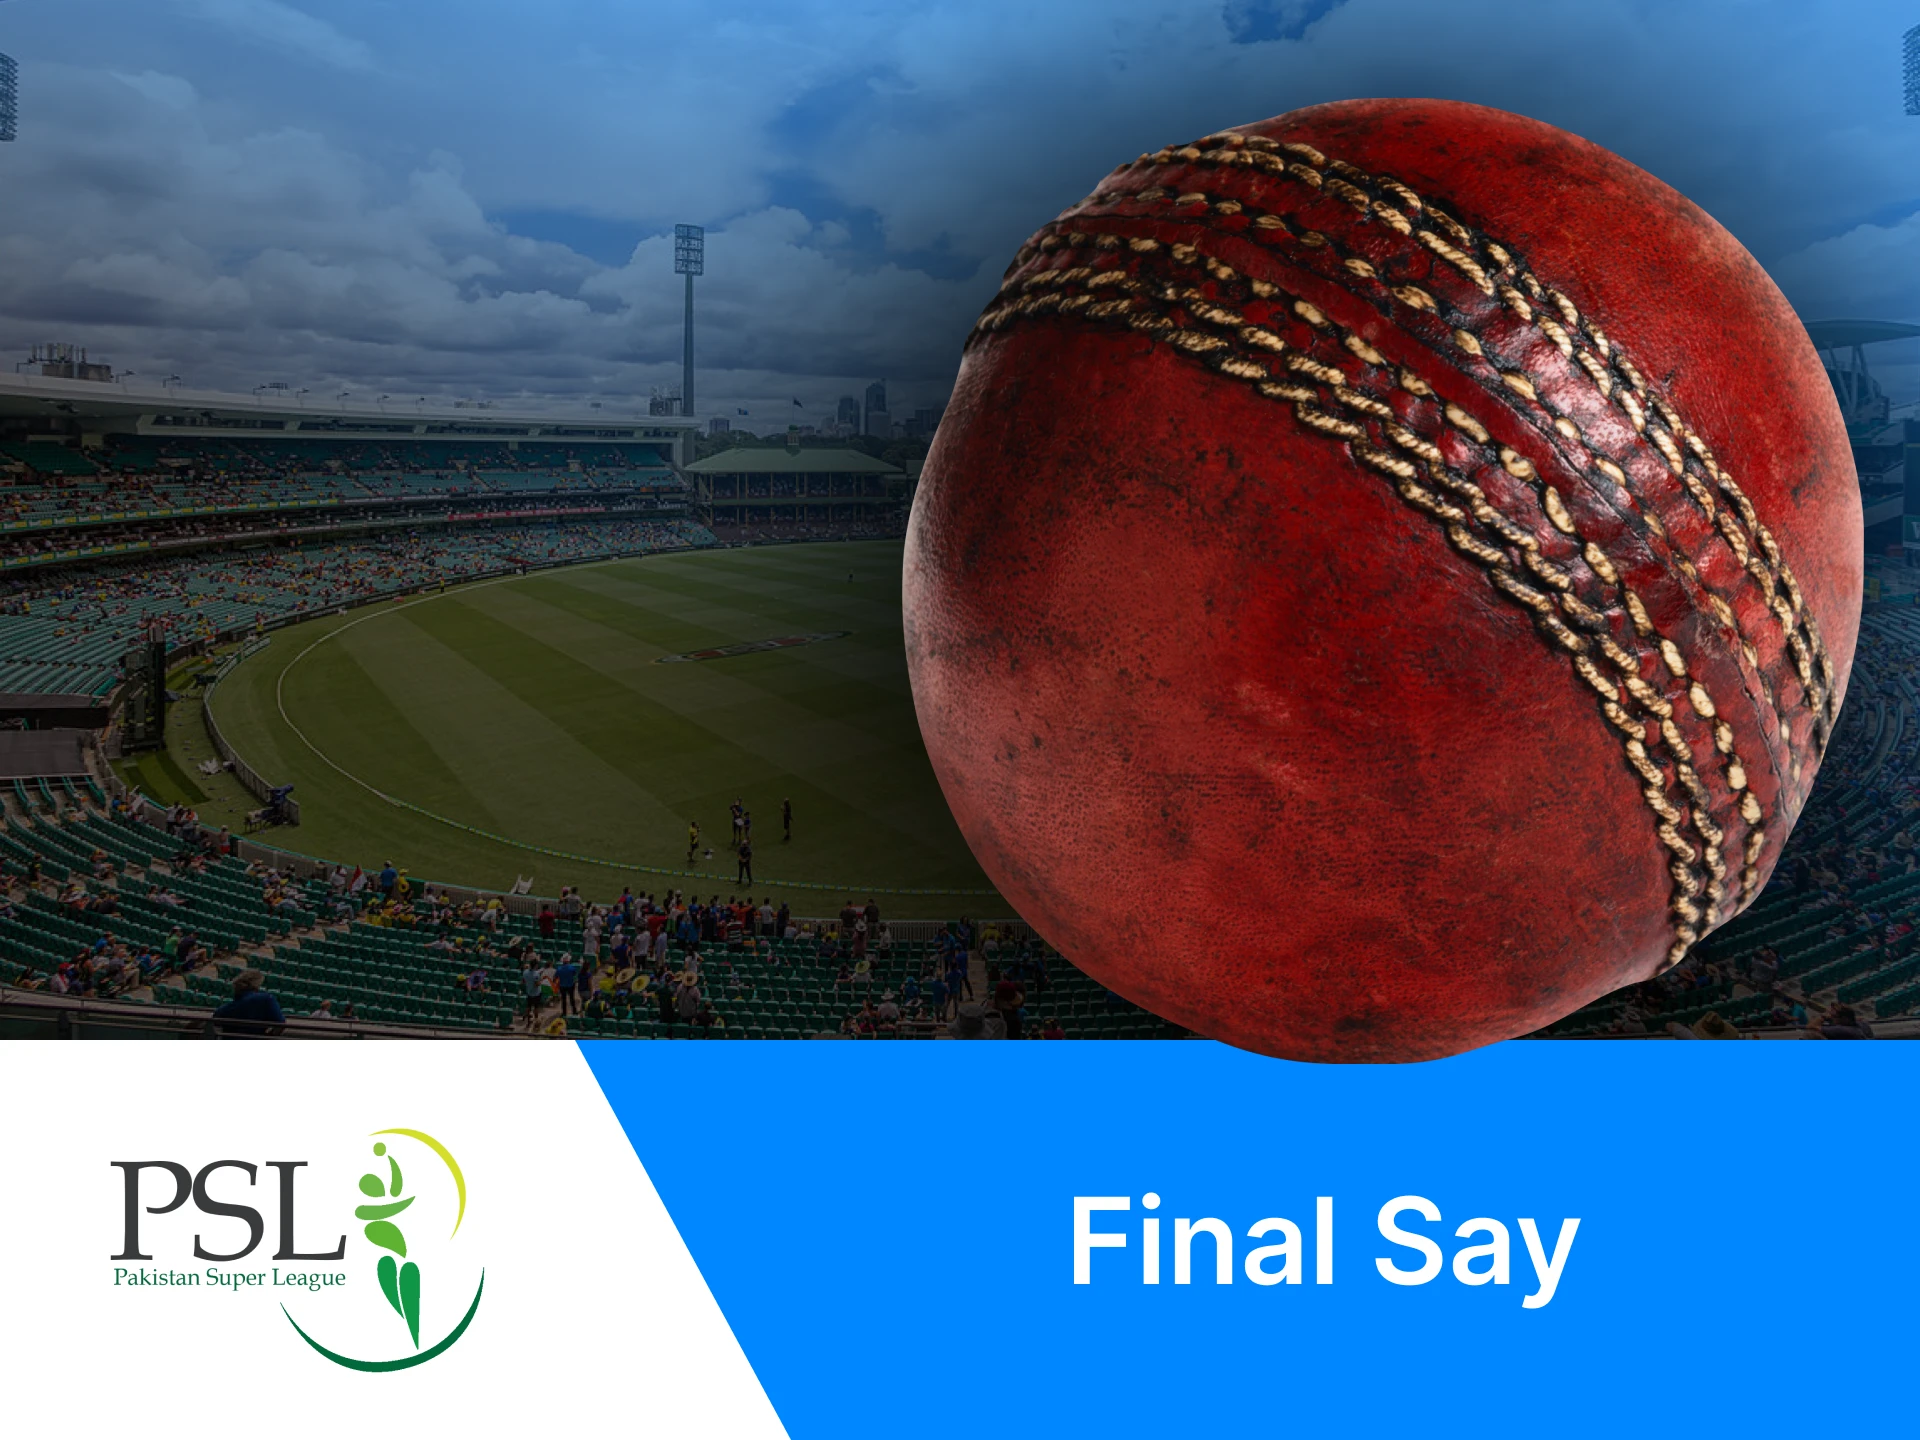 The PSL tournament is an exciting cricket event that is supported by many betting sites.